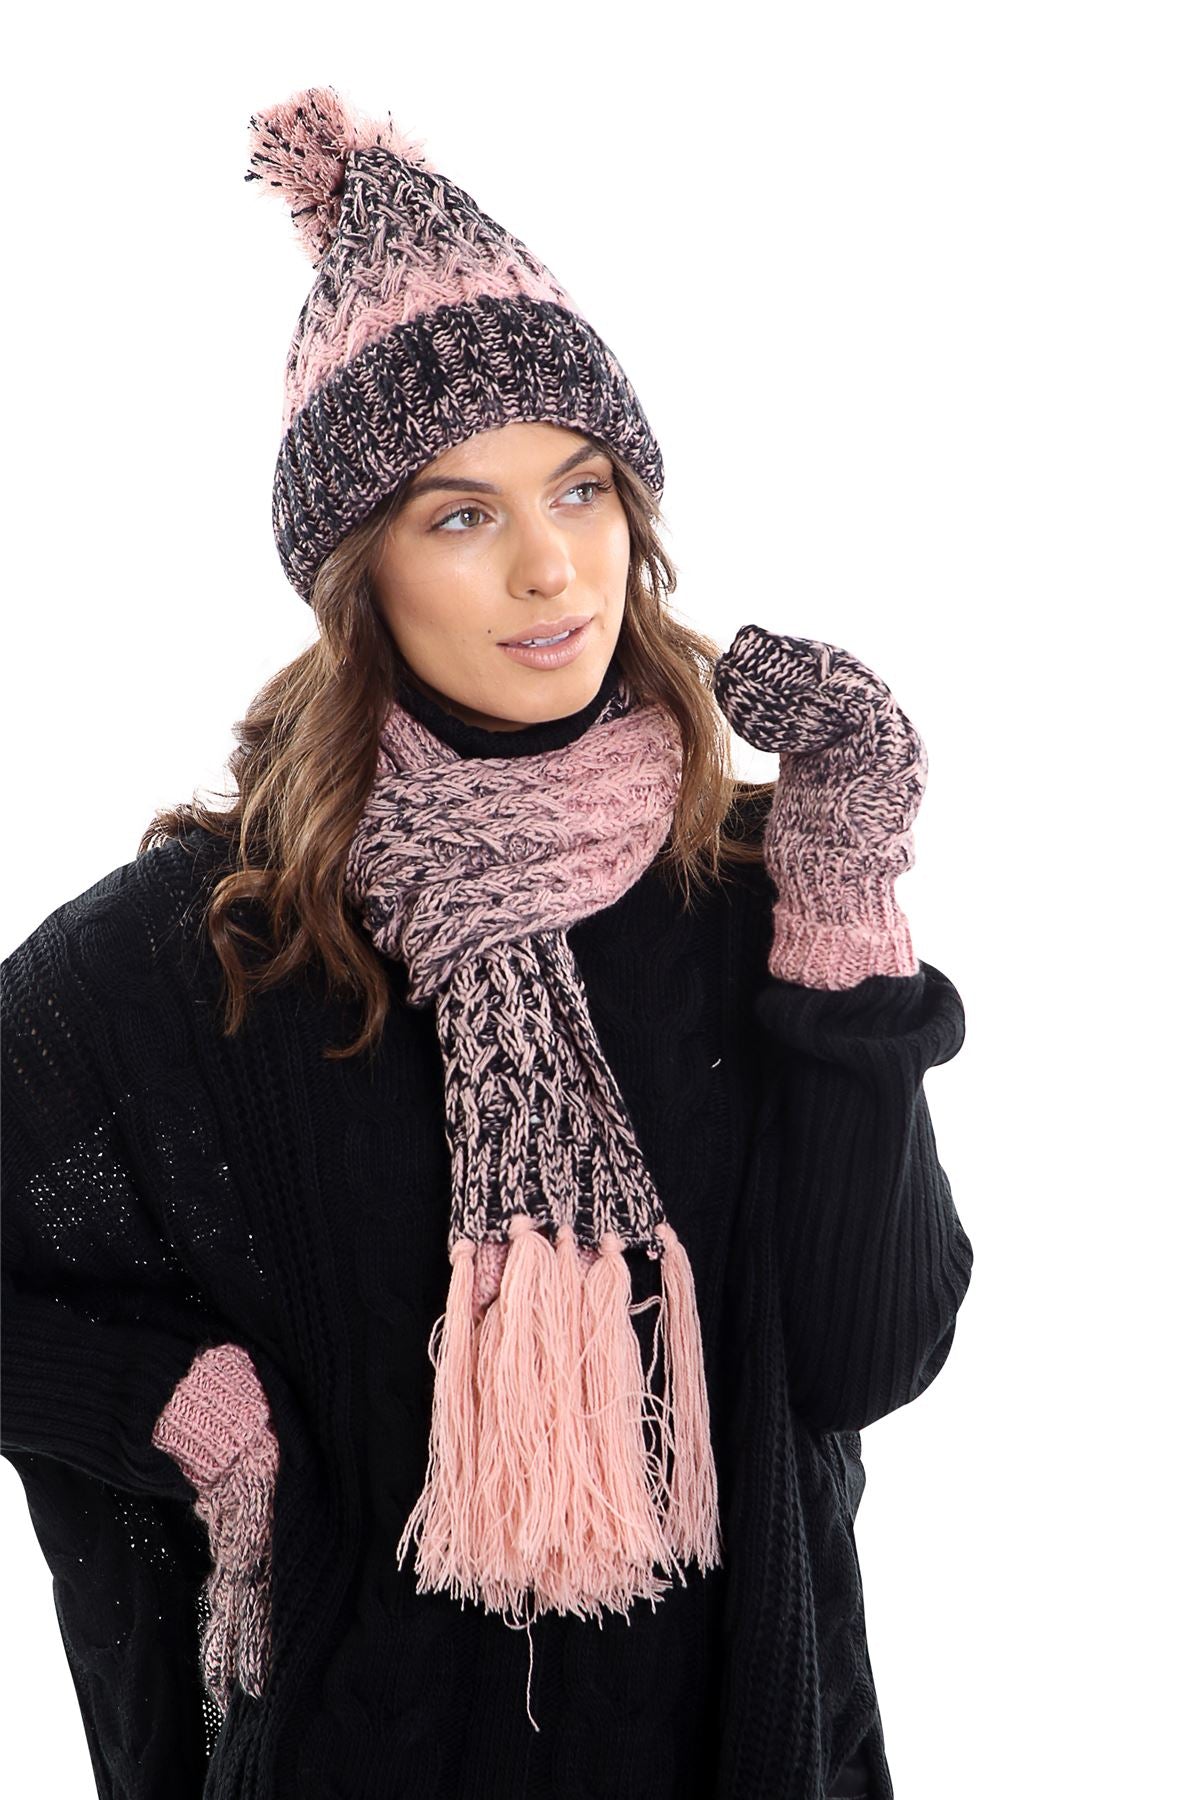 Womens LHTSF172 Wooly Thick knitted Hat, Scarf and Glove set -  Pink & Black